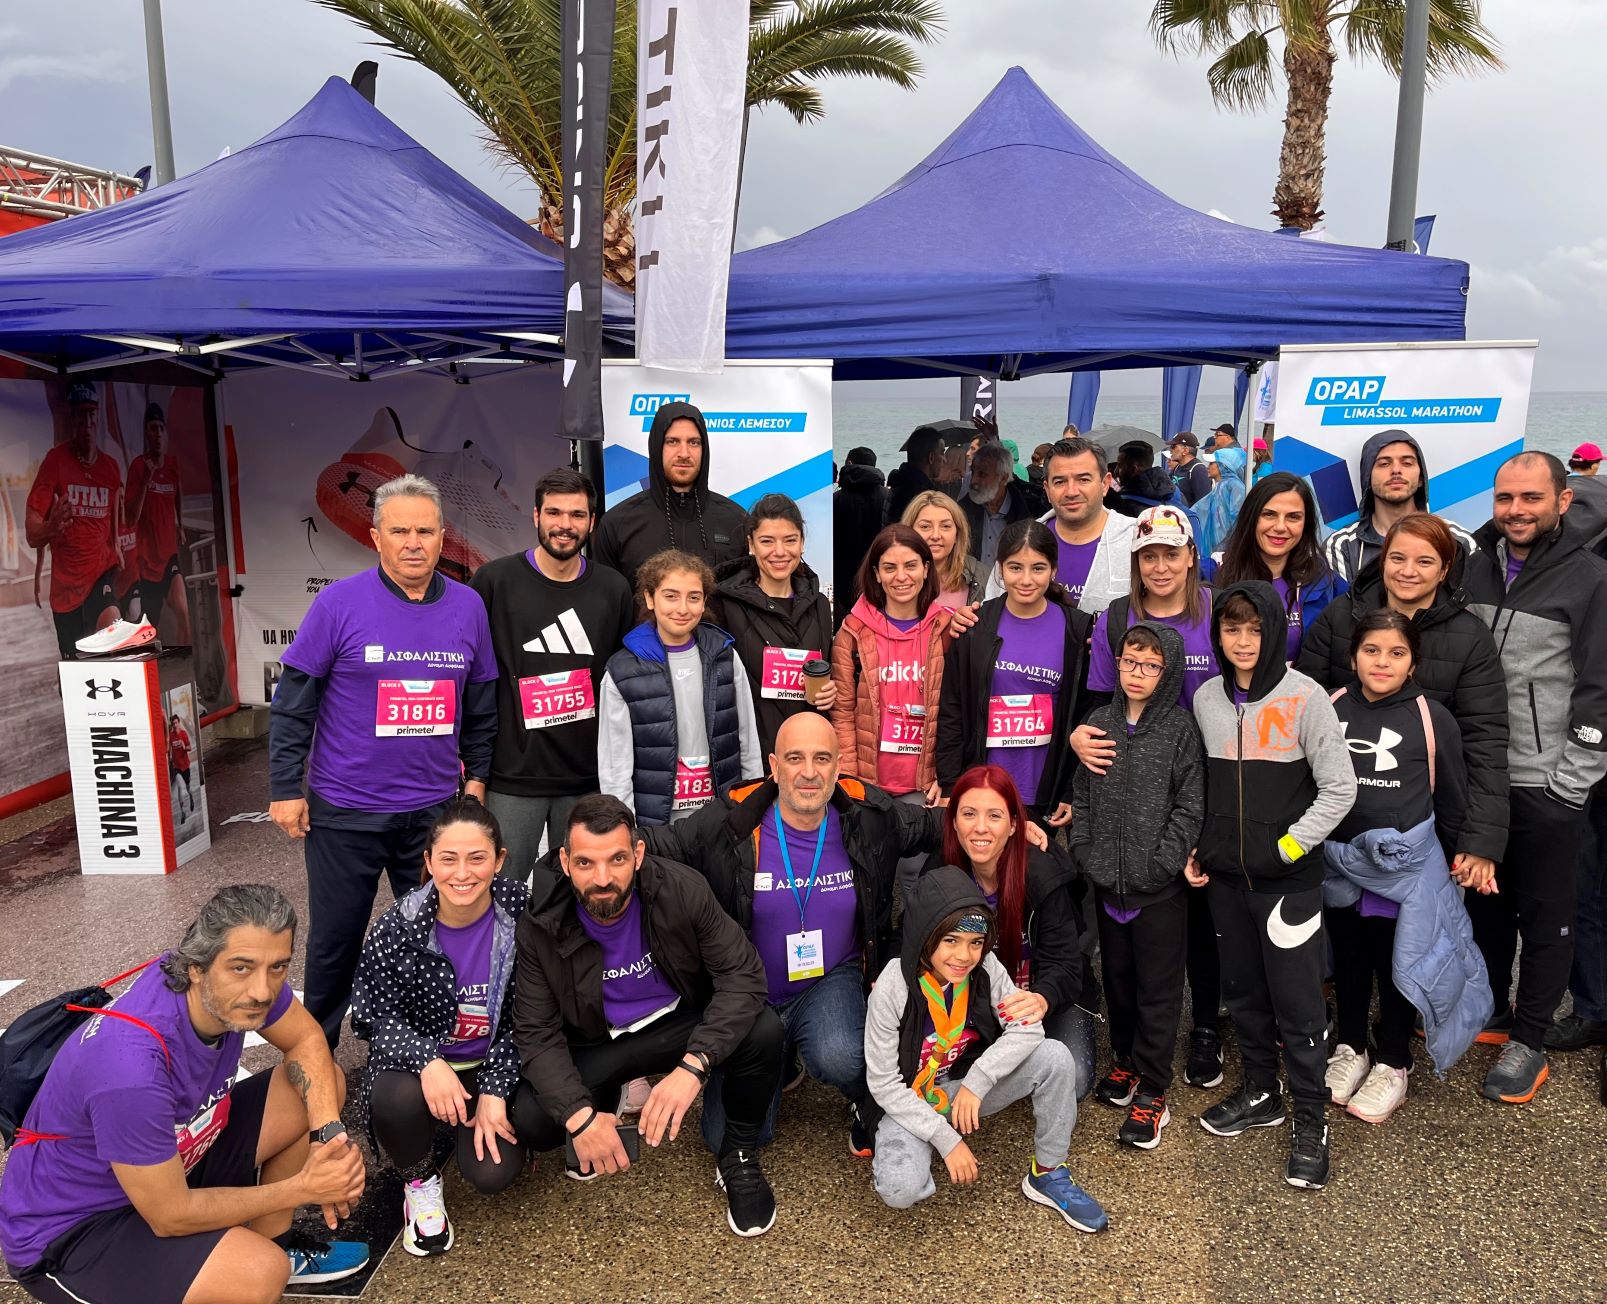 The Power of Insurance of CNP ASFALISTIKI covered the participants of OPAP Limassol Marathon 2023